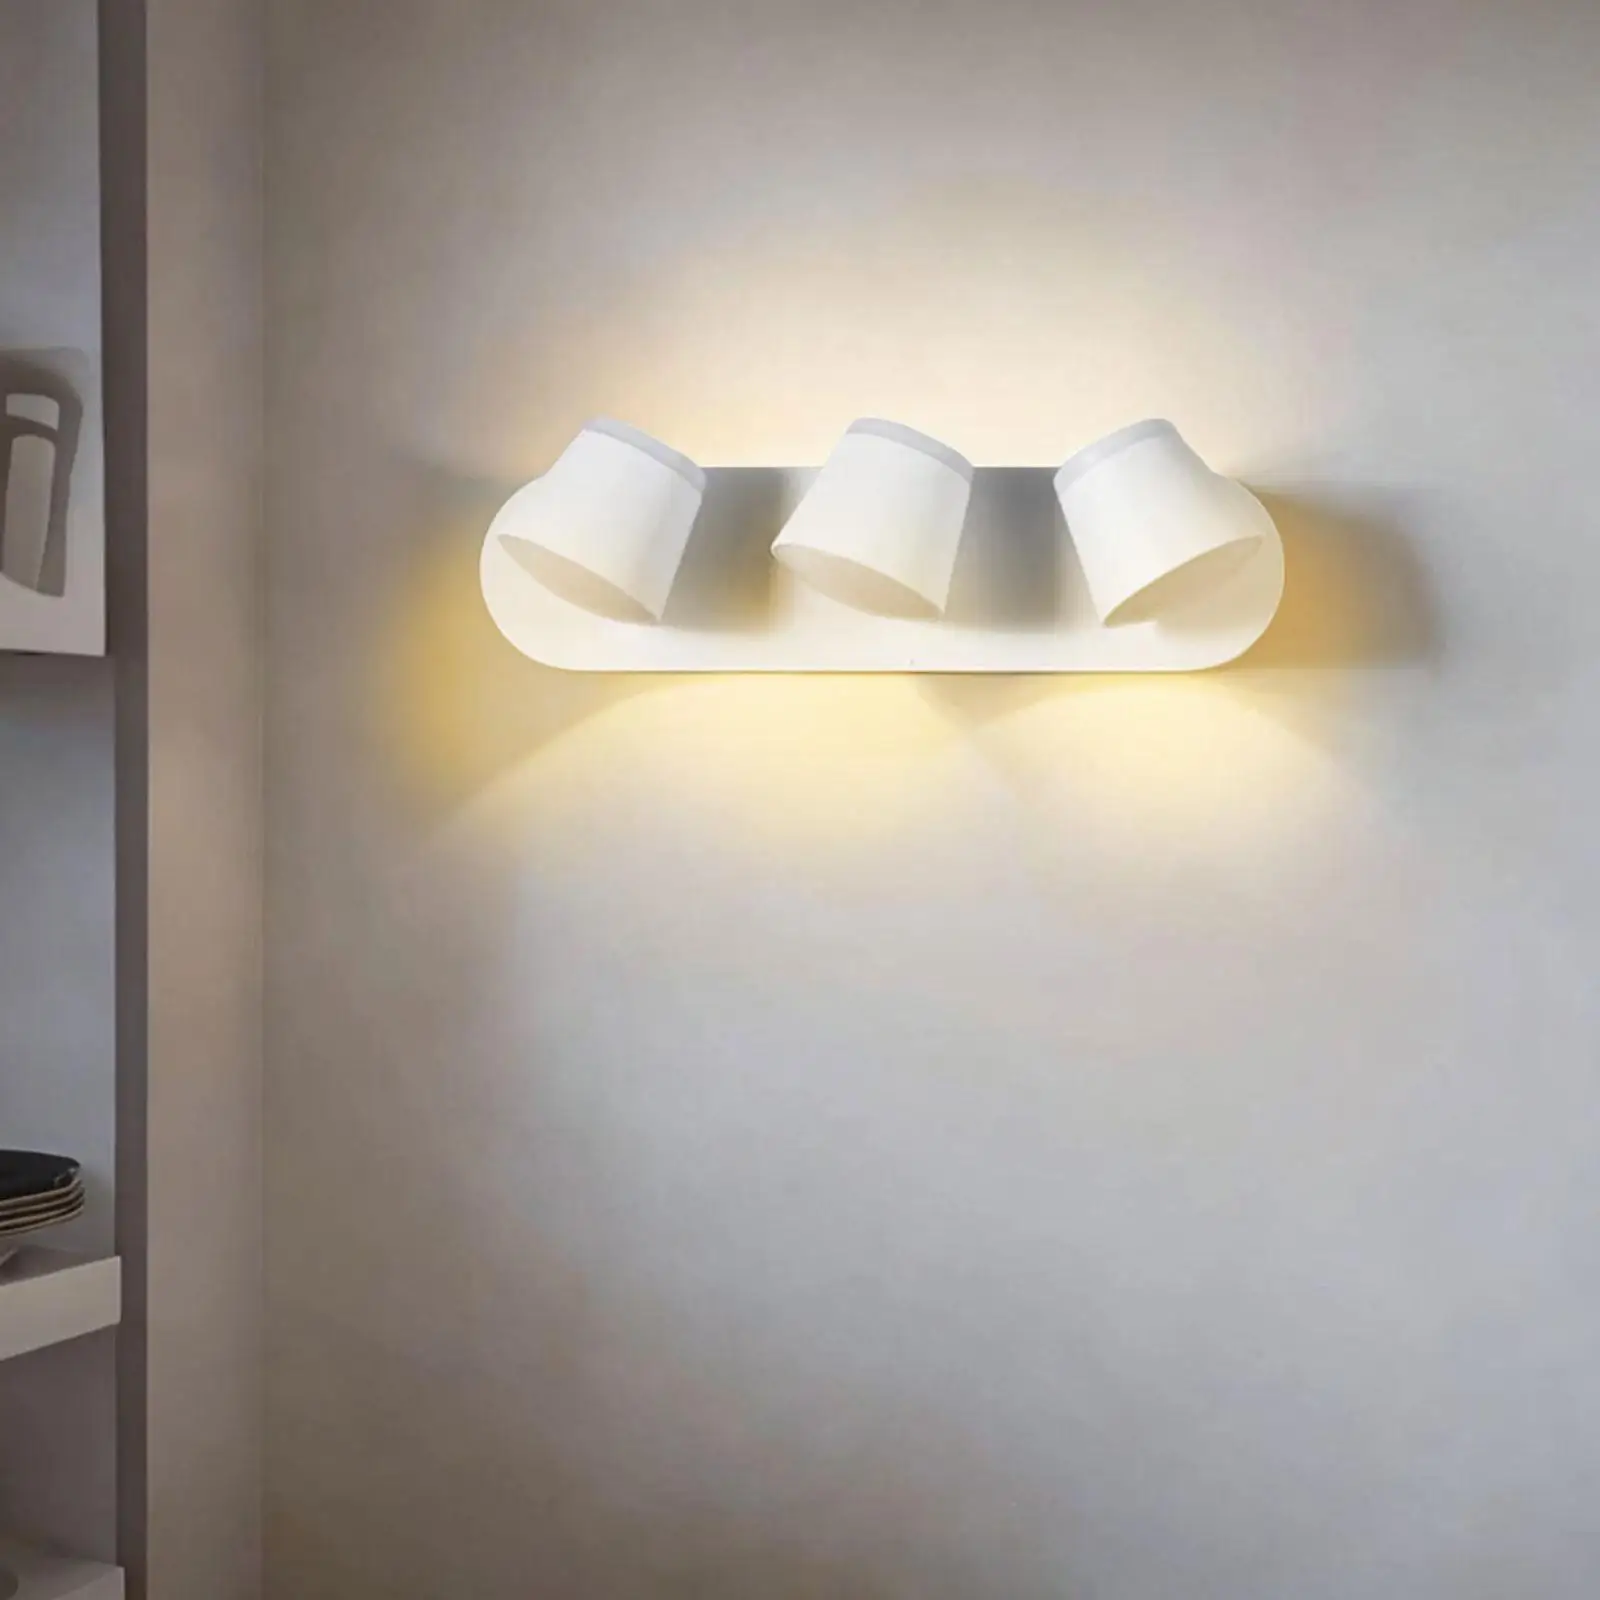 LED Wall Sconce Bedside Lamps Wall Mounted Light Decorative Modern Adjustable Wall Lamp for Hallway, Stair, Living Room, Porch,